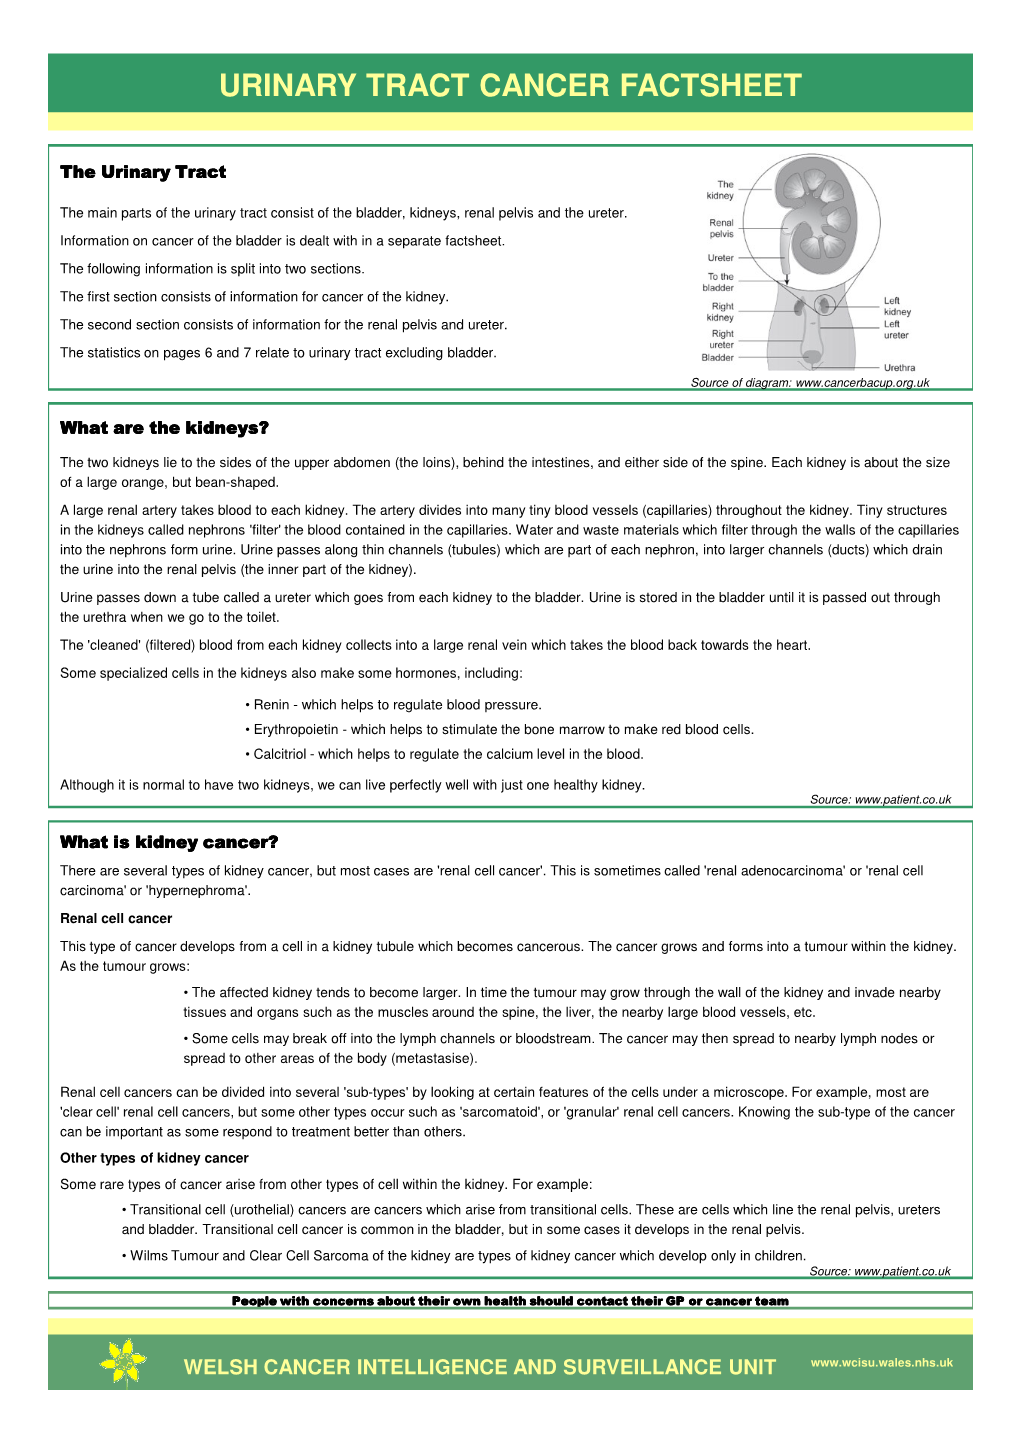 Urinary Tract Cancer Factsheet